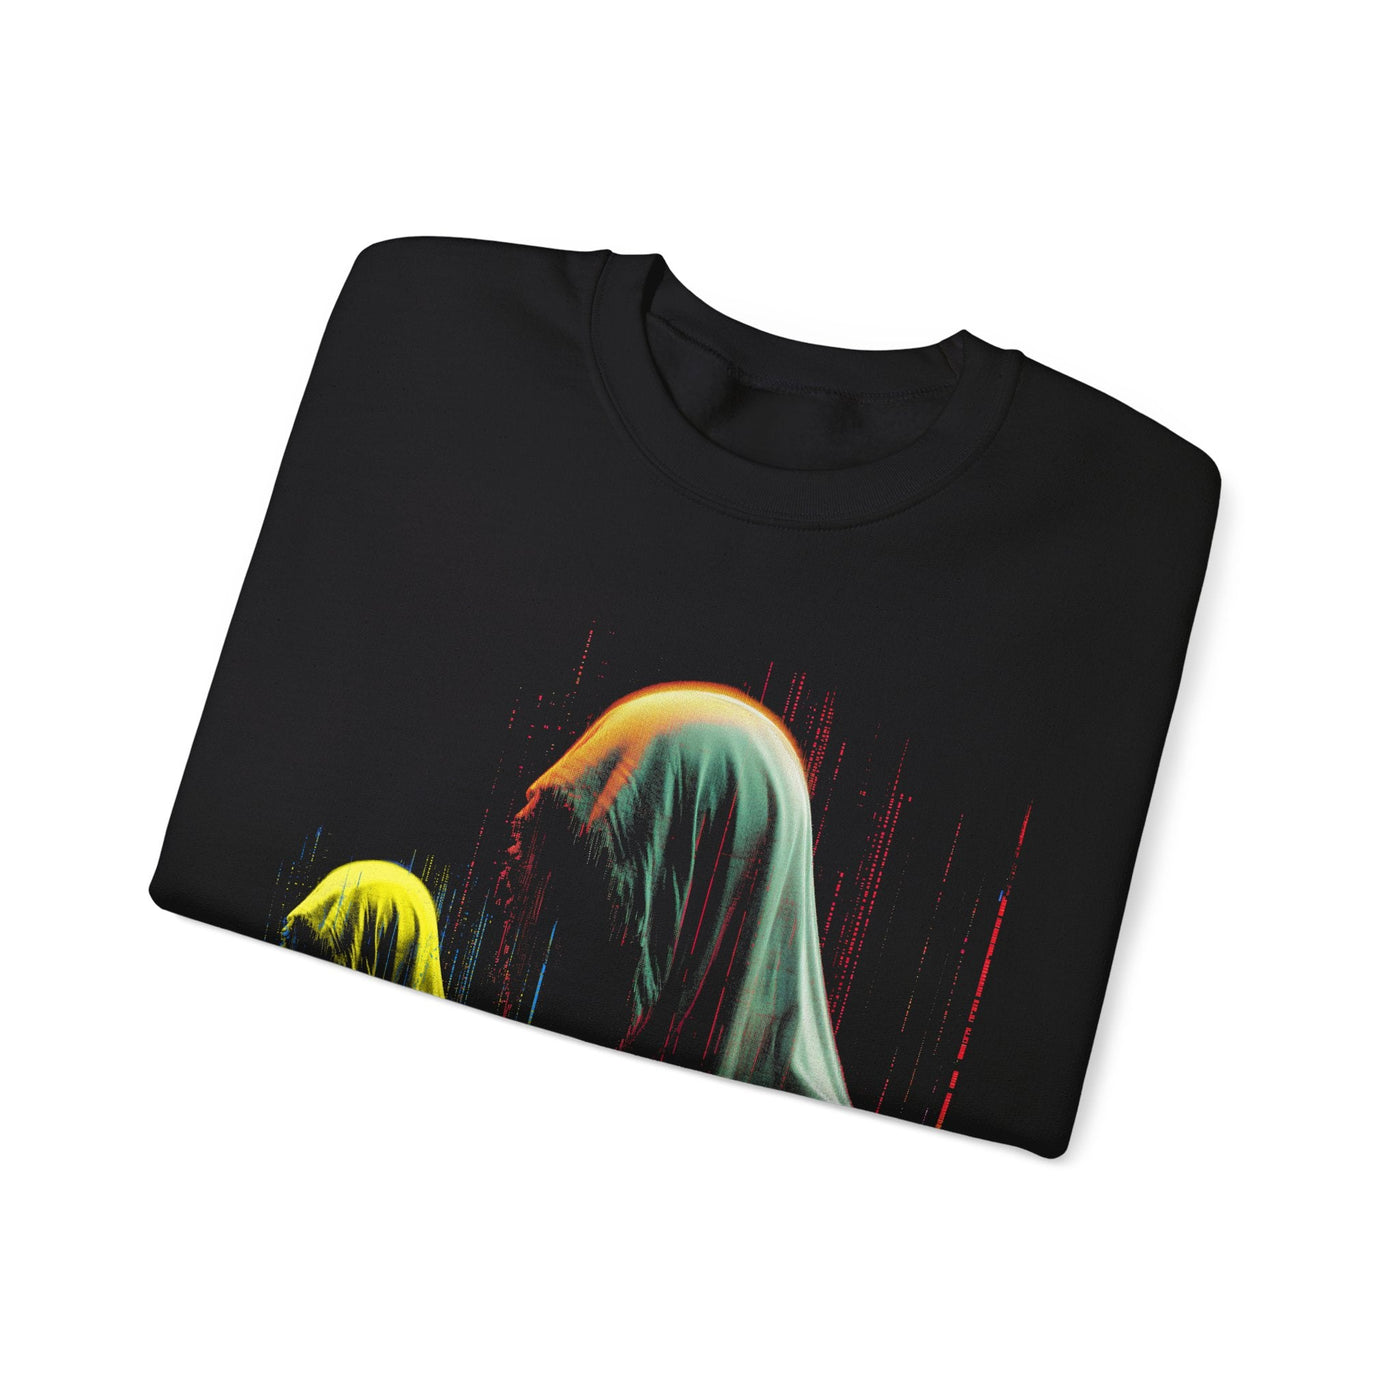 Glitchy Occulted Caped Figures Classic Sweatshirt